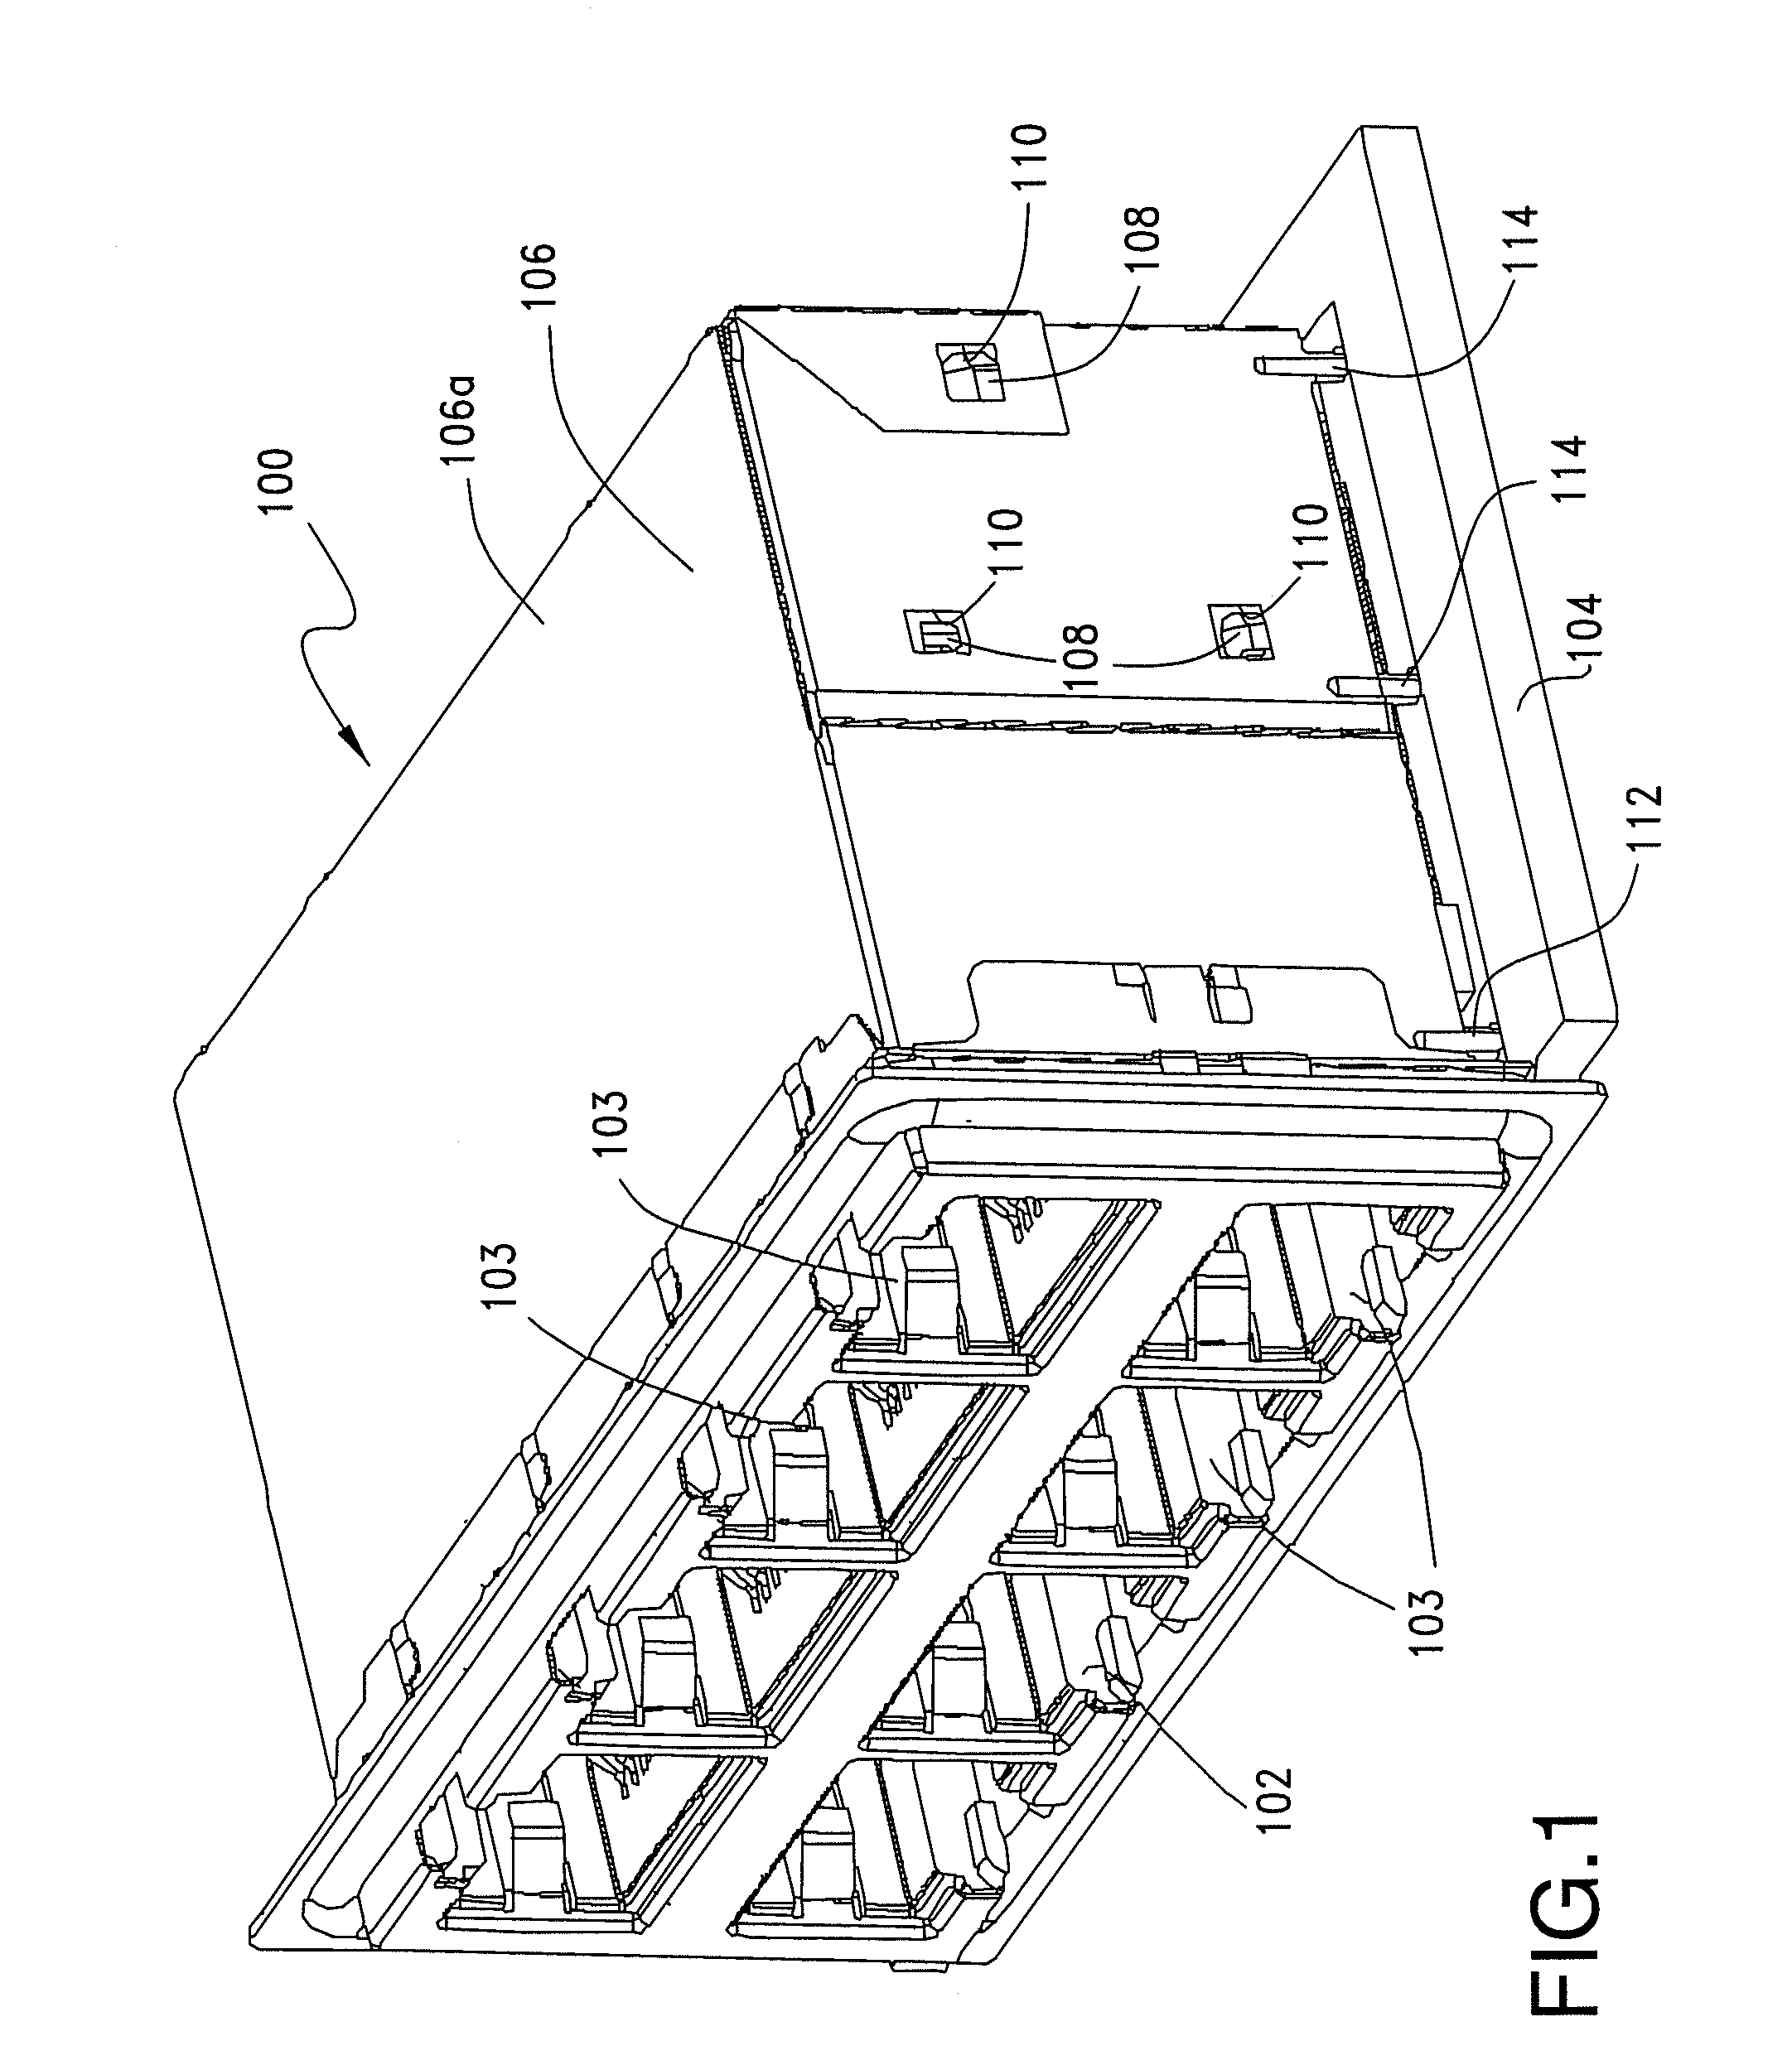 Process and apparatus for removing gaseous contaminants from gas stream comprising gaseous contaminants